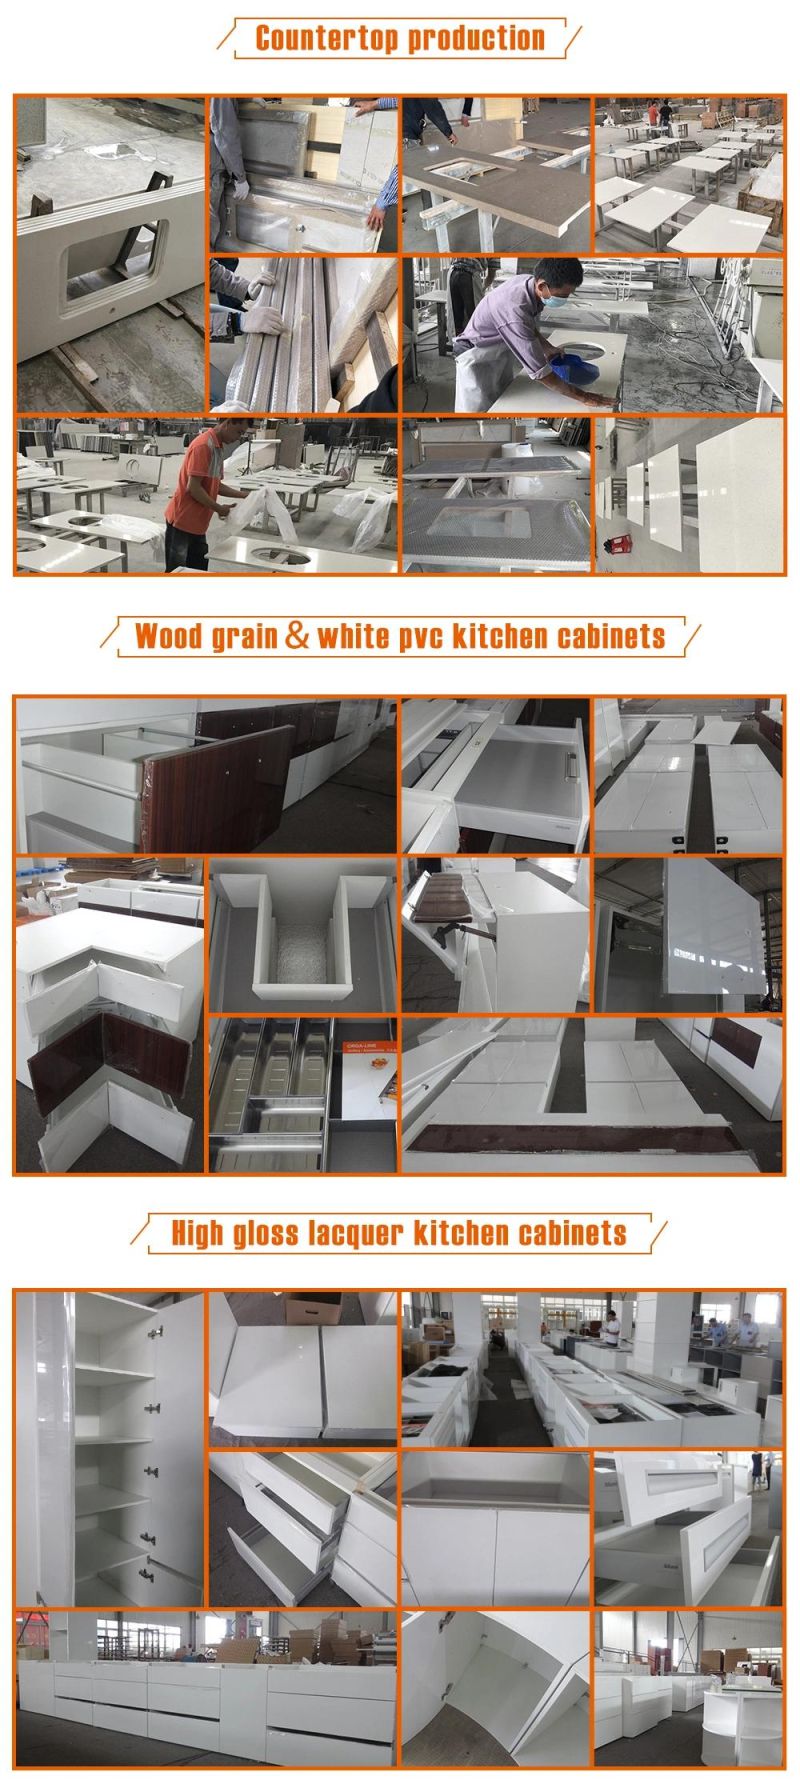 New Style Classic Modular Solid Wood Kitchen Cabinet Supplier